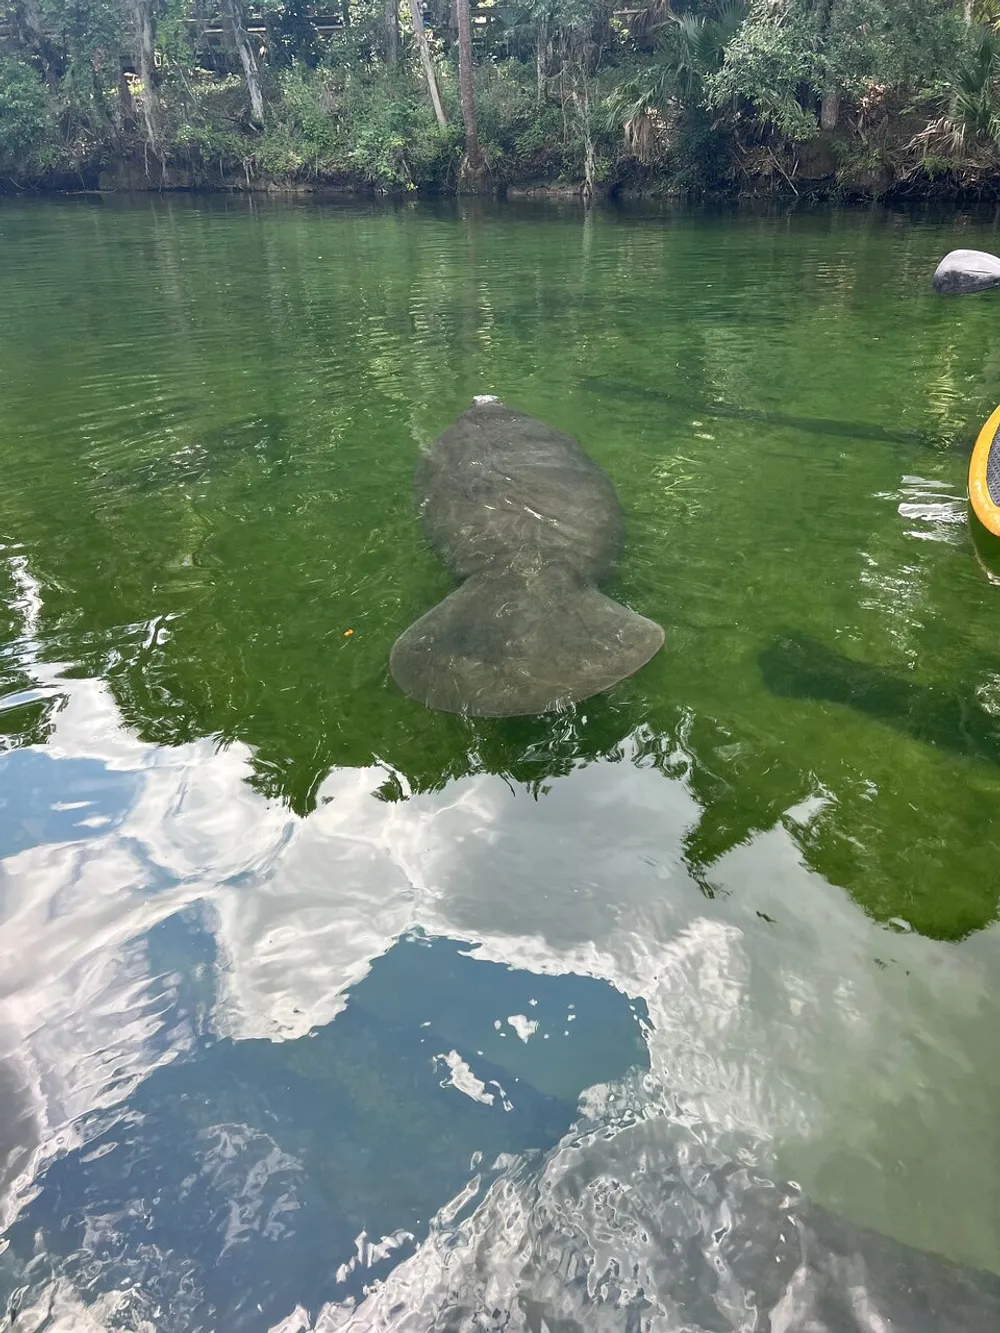 A manatee is swimming in clear green waters near a forested riverbank